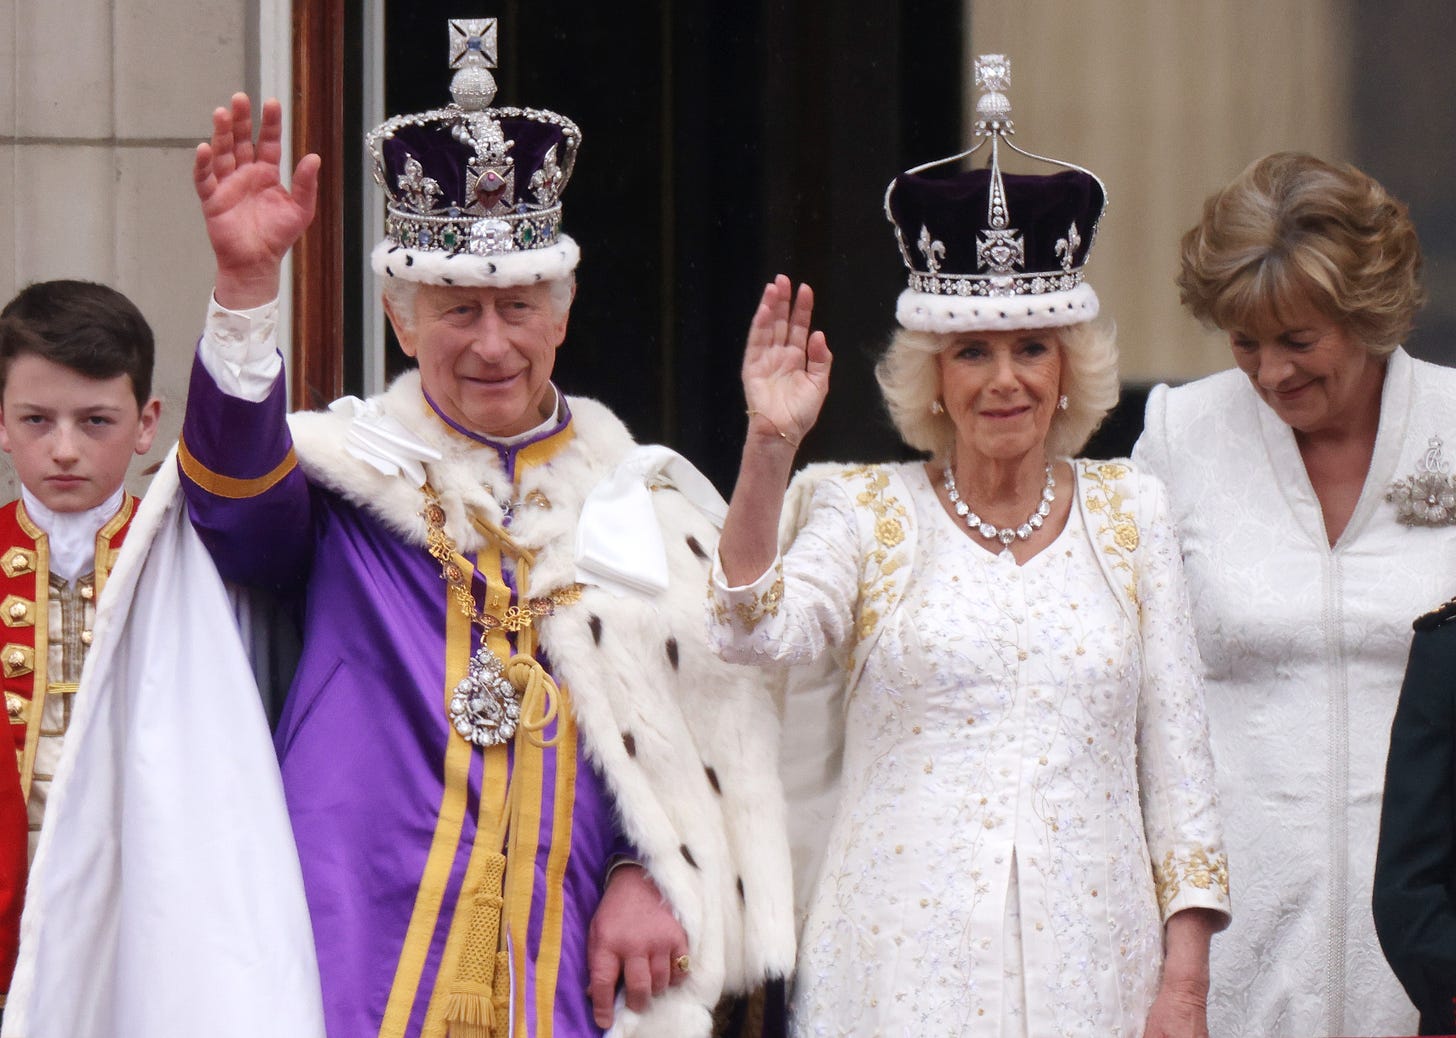 King Charles and Queen Camilla waving from balcony of Buckingham Palace wearing crowns